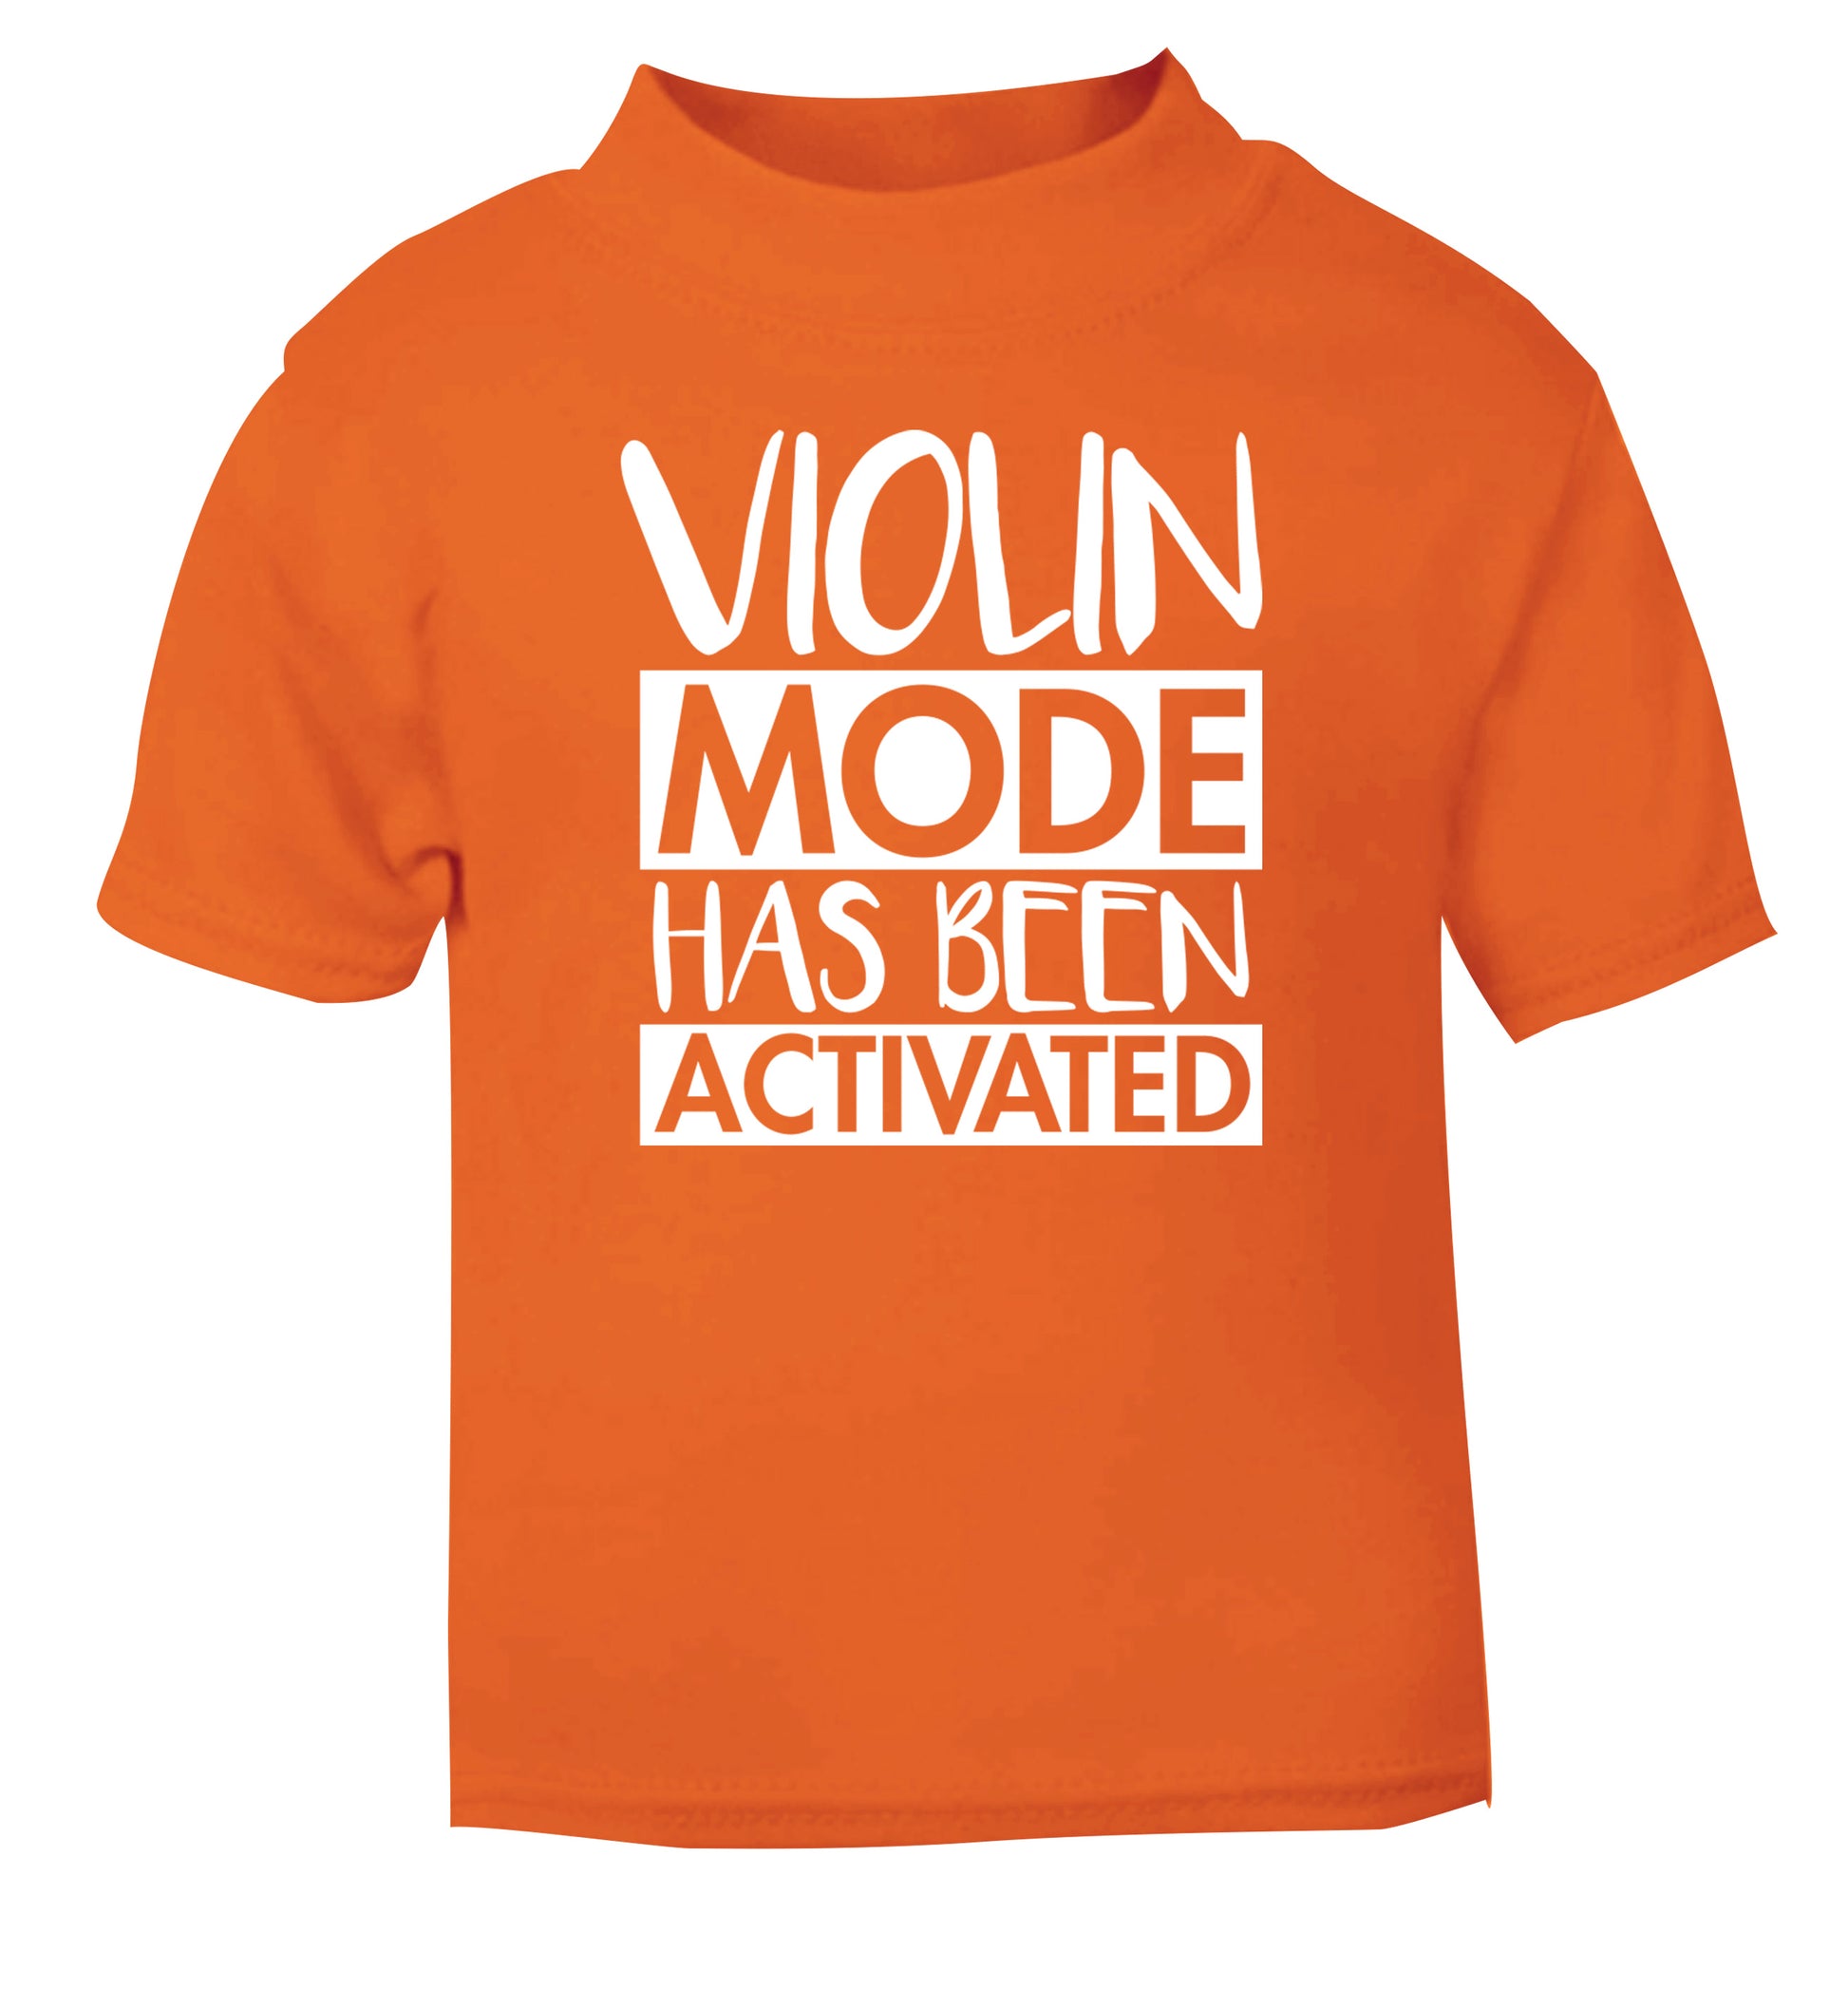 Violin Mode Activated orange Baby Toddler Tshirt 2 Years